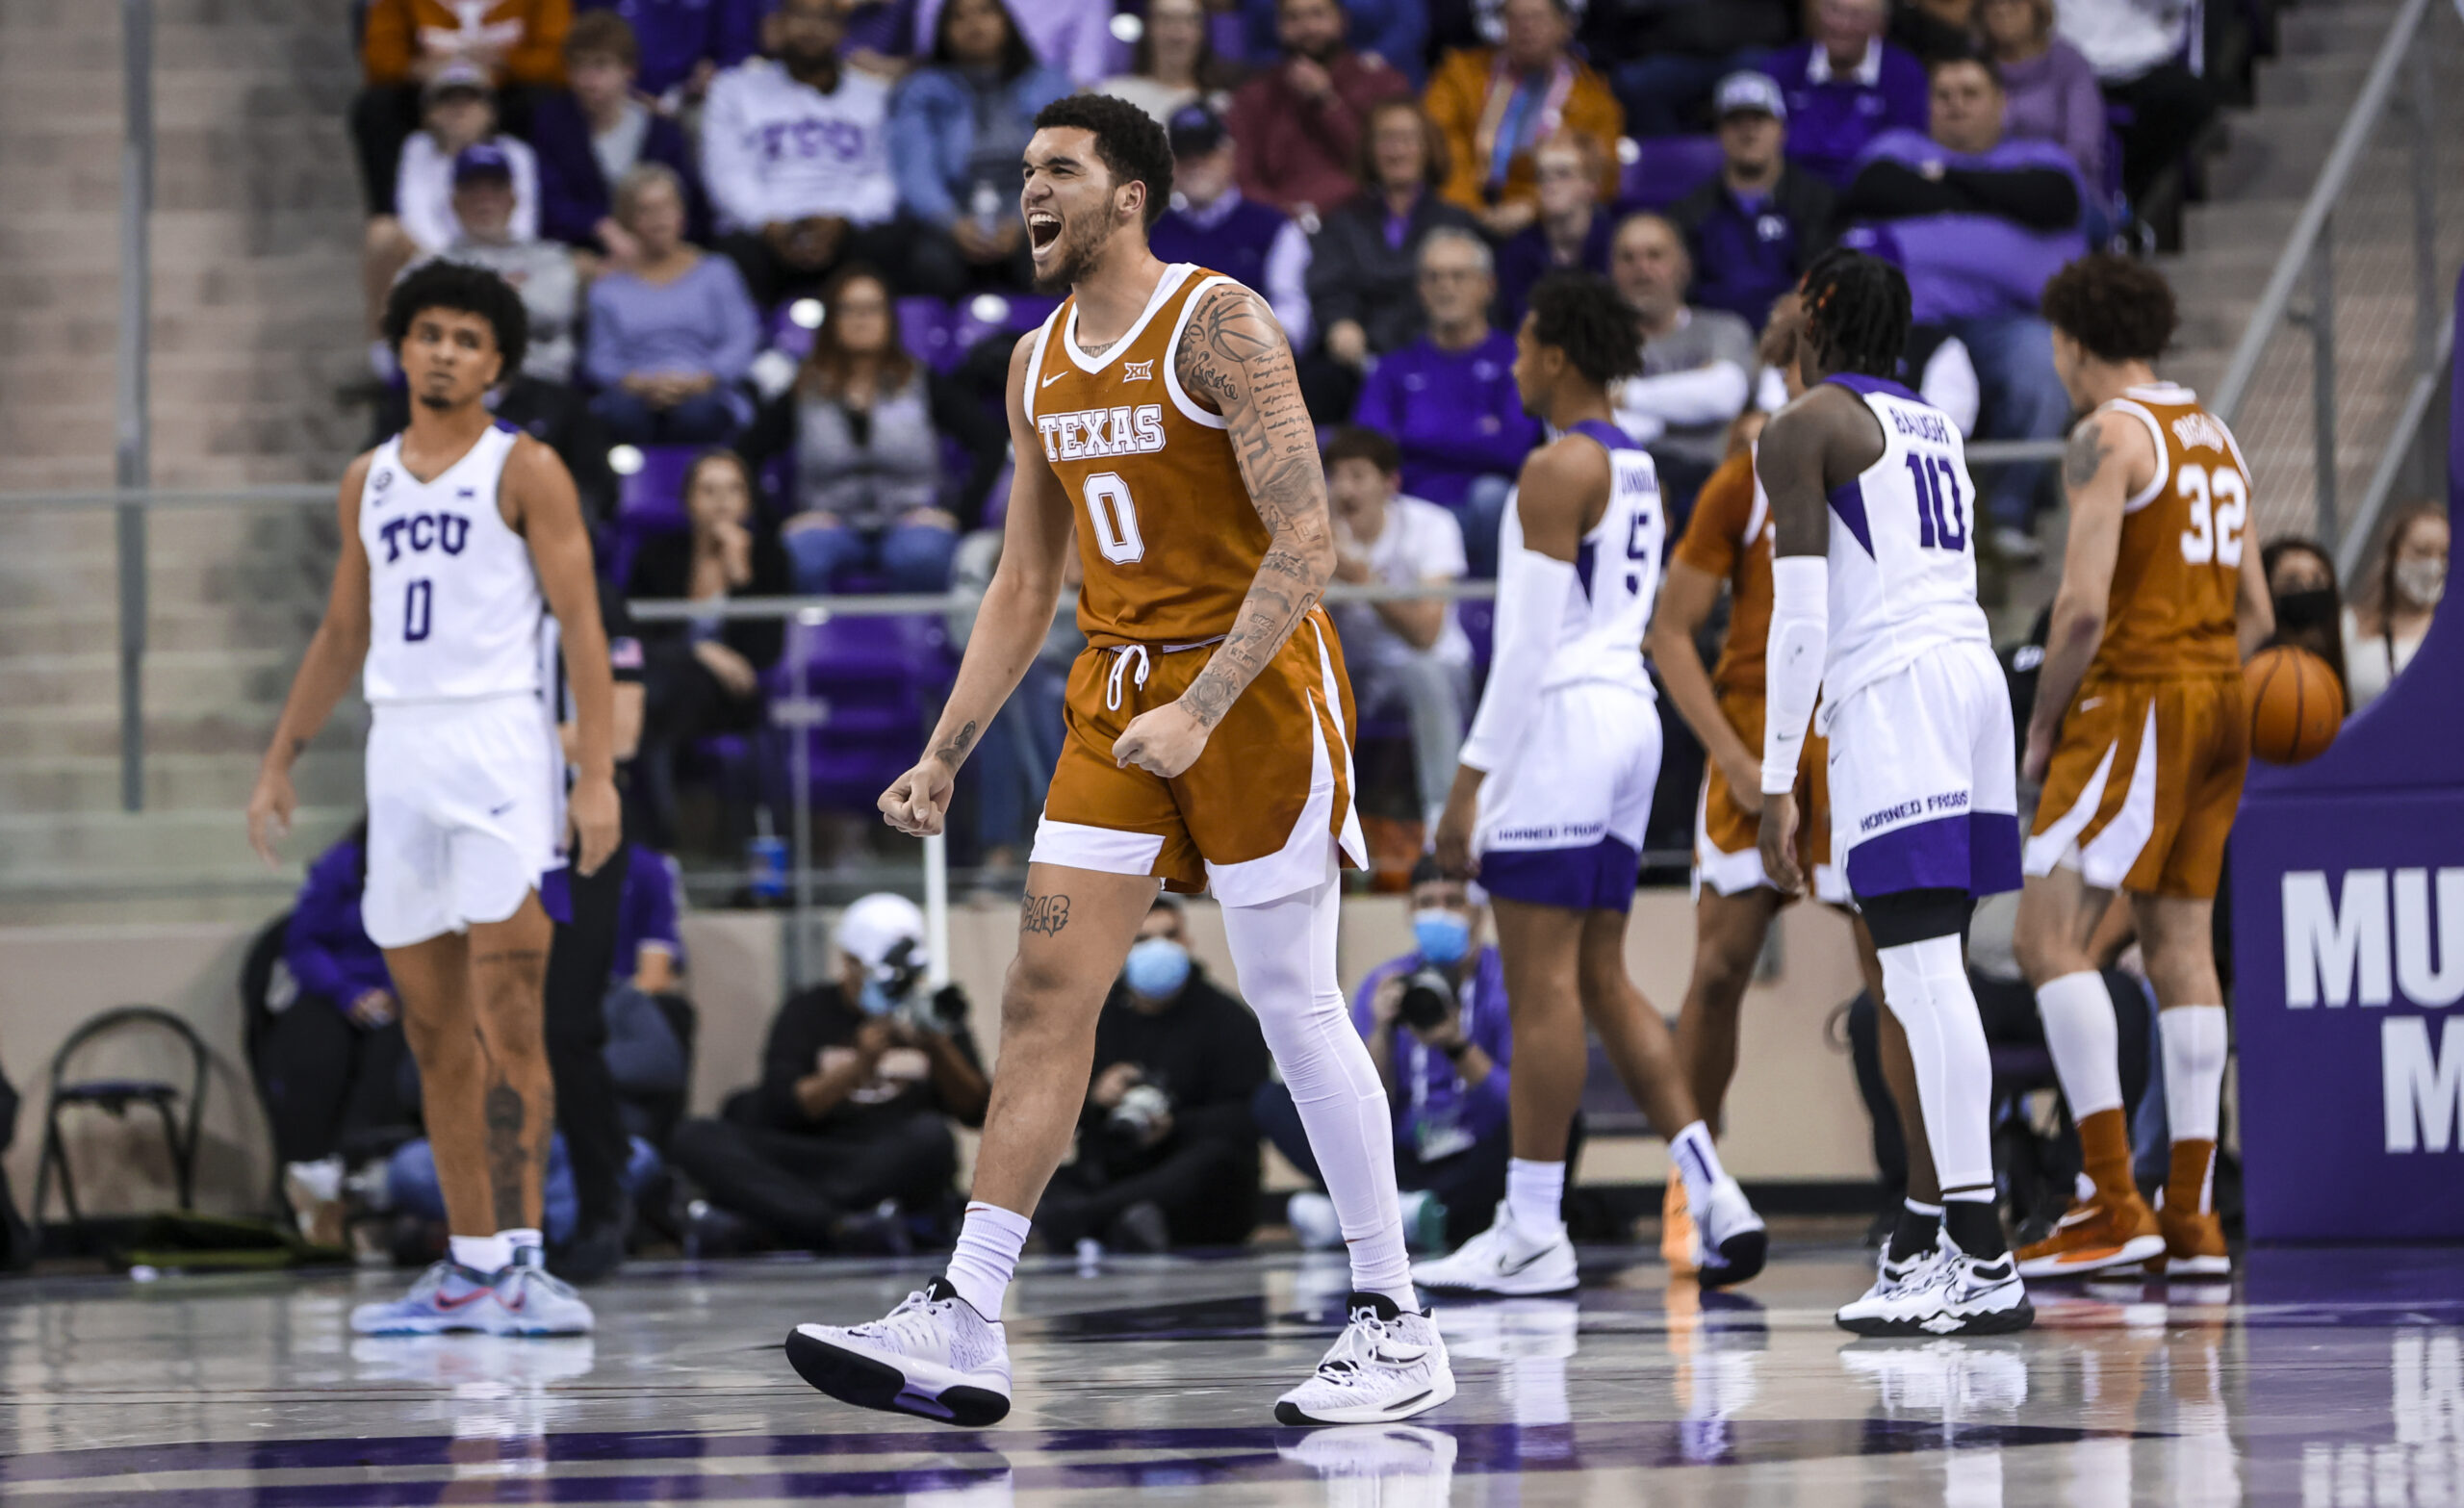 How to watch, listen and stream Texas vs. TCU on Wednesday